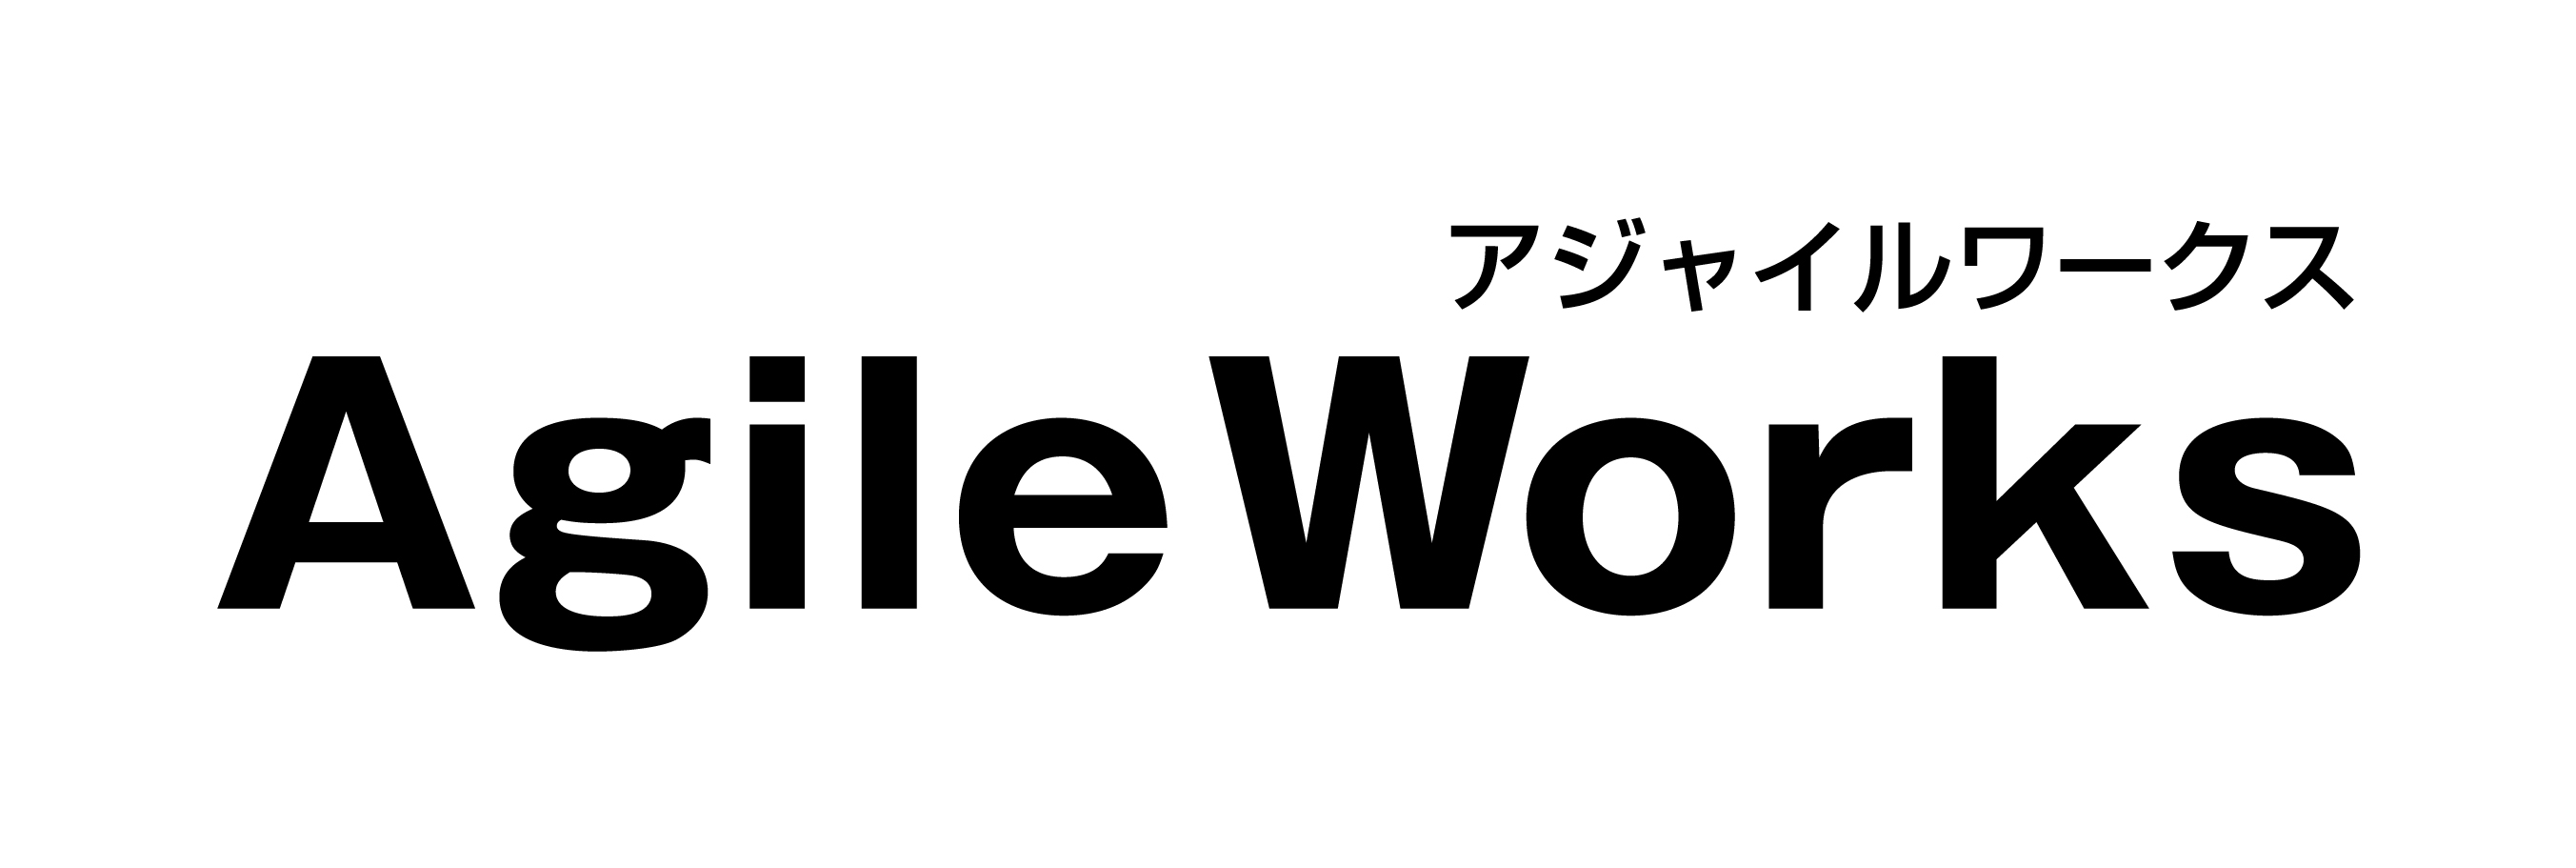 AgileWorks by 株式会社エイトレッド